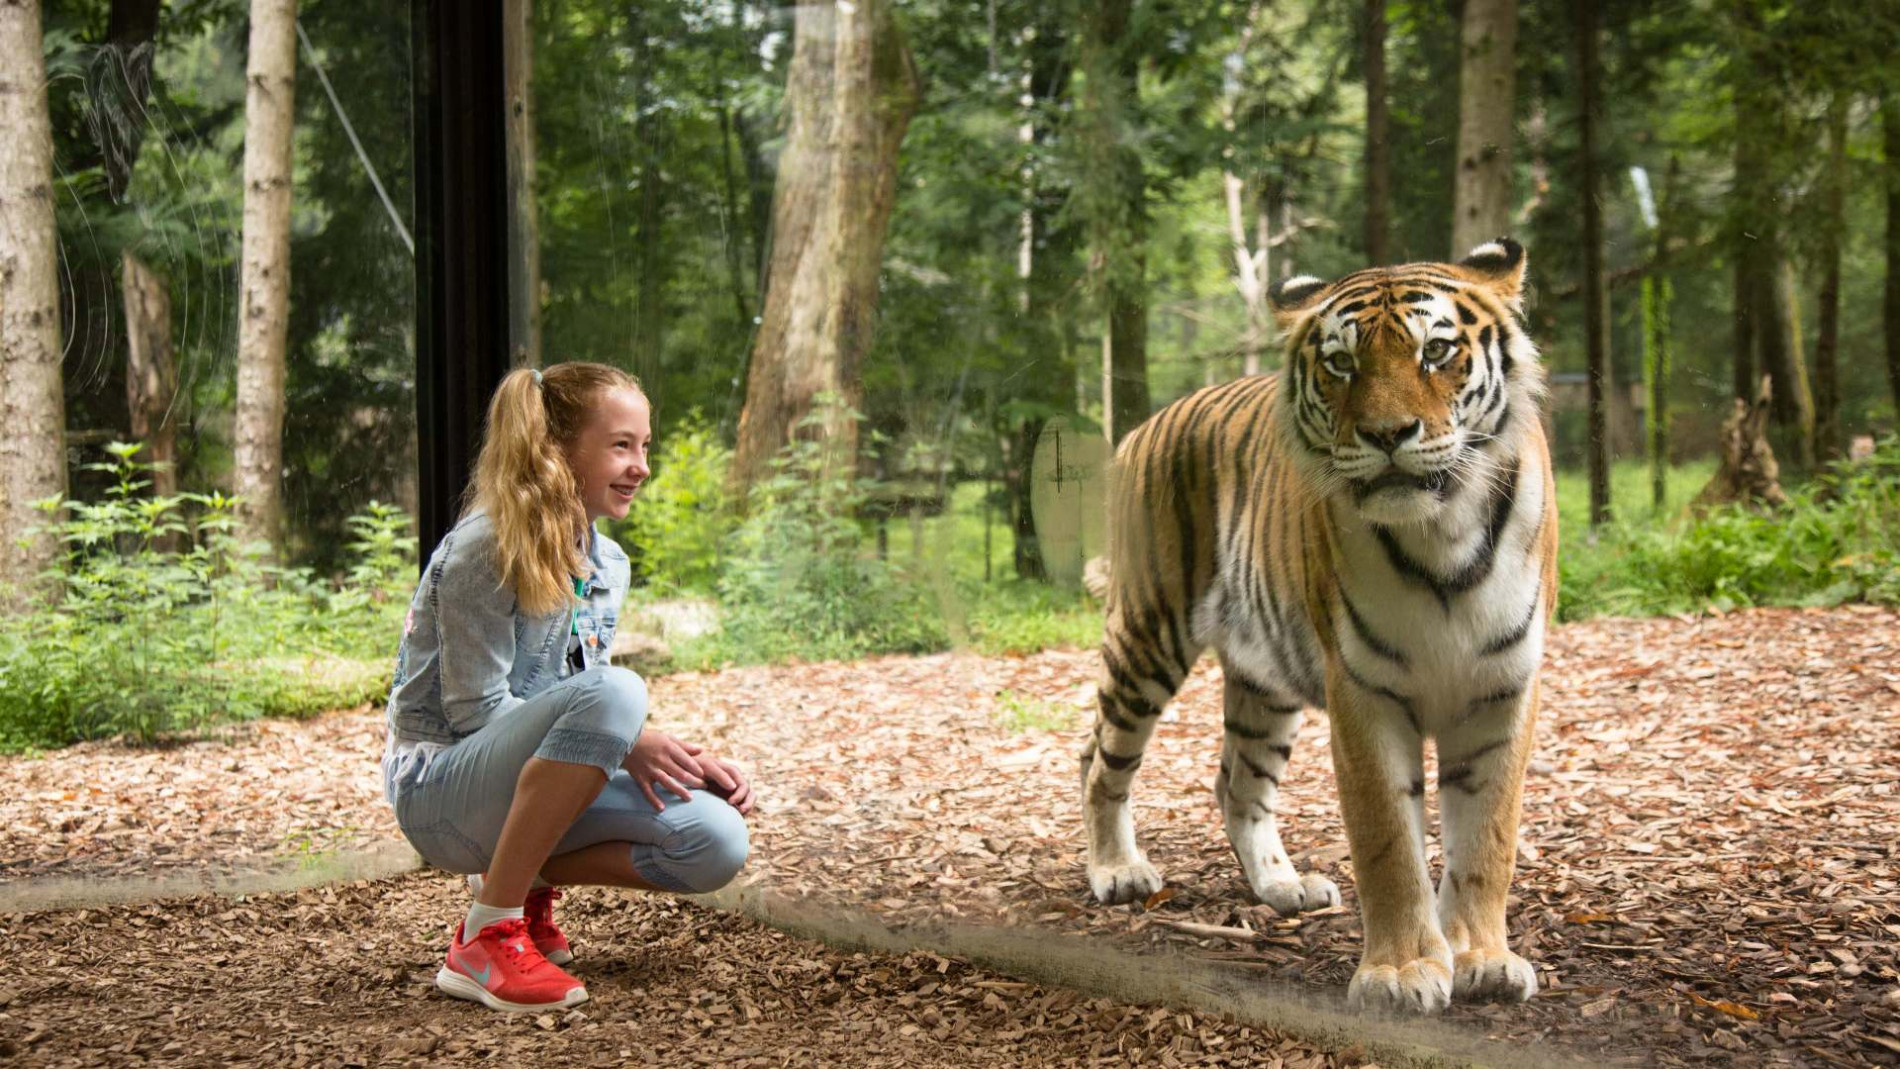 a girl is kneeling next to a tiger, forest behind